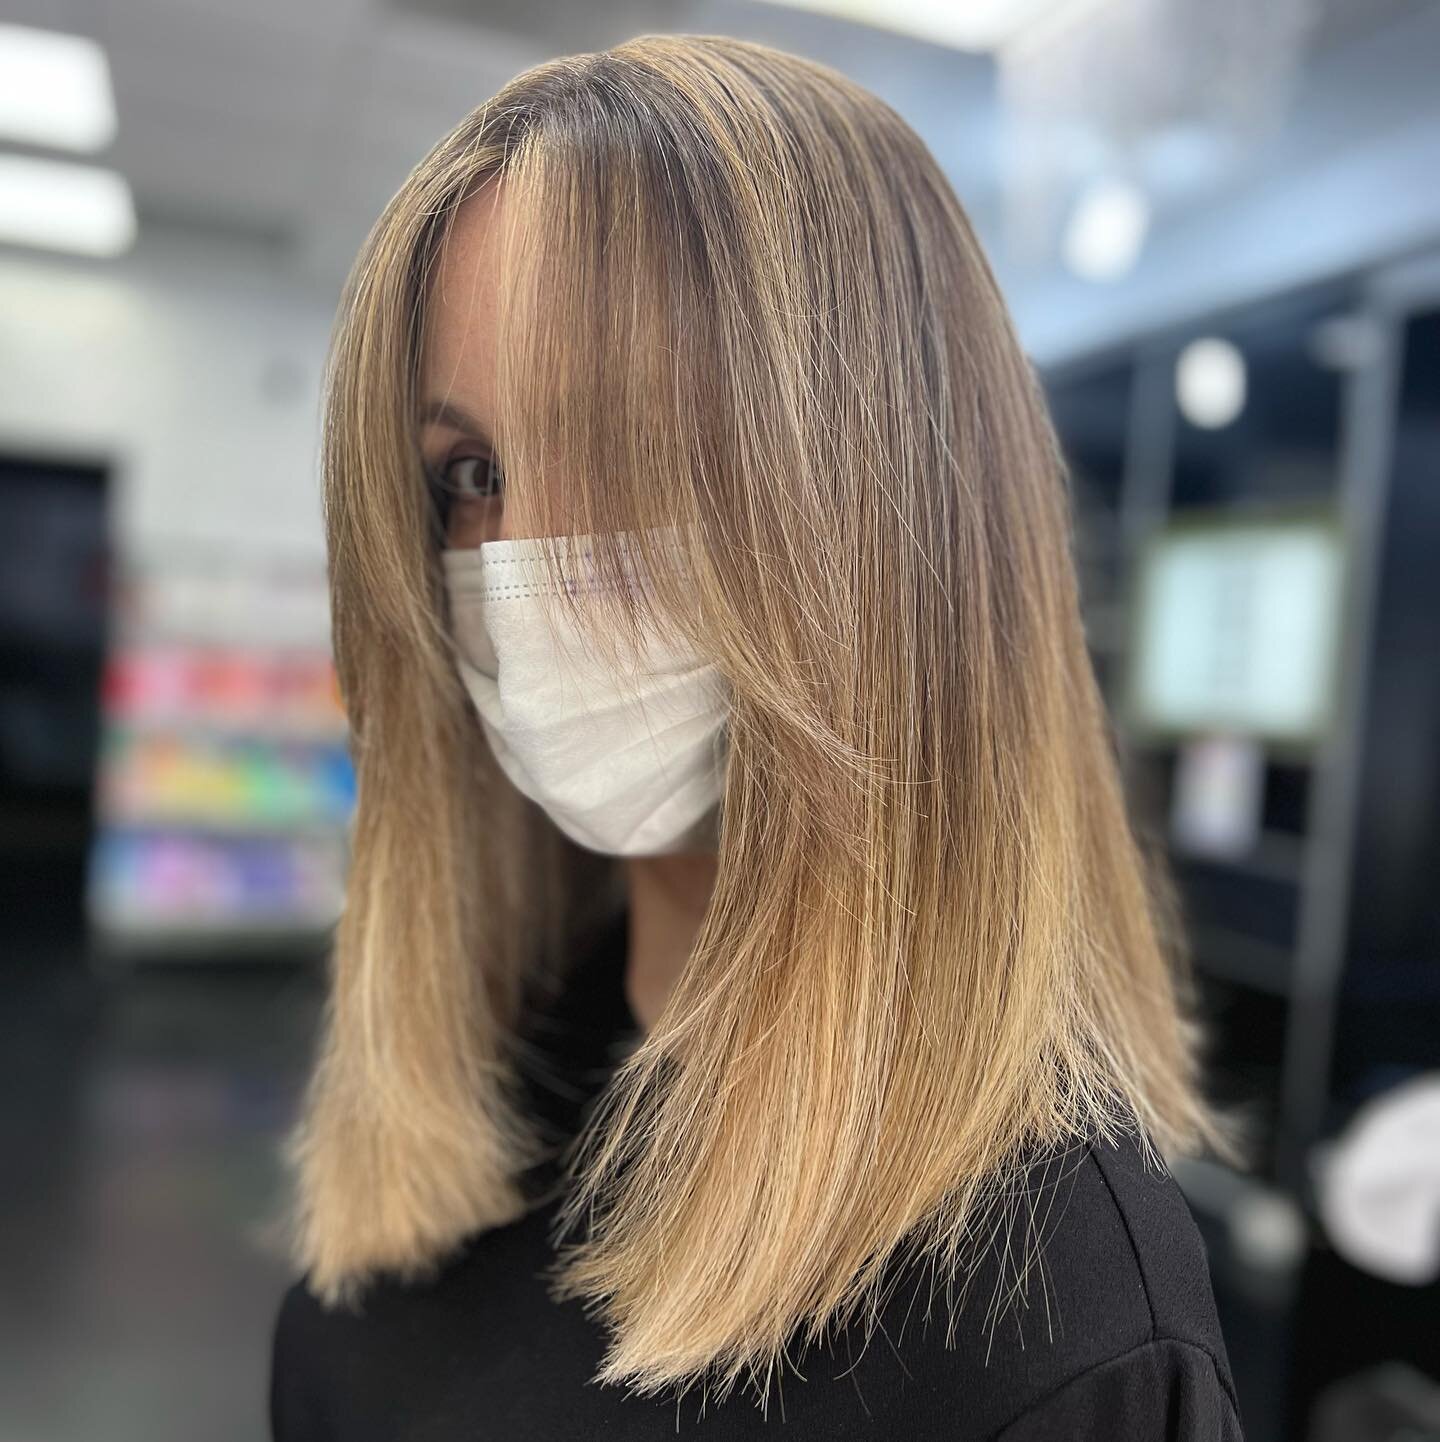 Pretty, lived-in blonde for this pretty lady to blend in her natural sparkle!